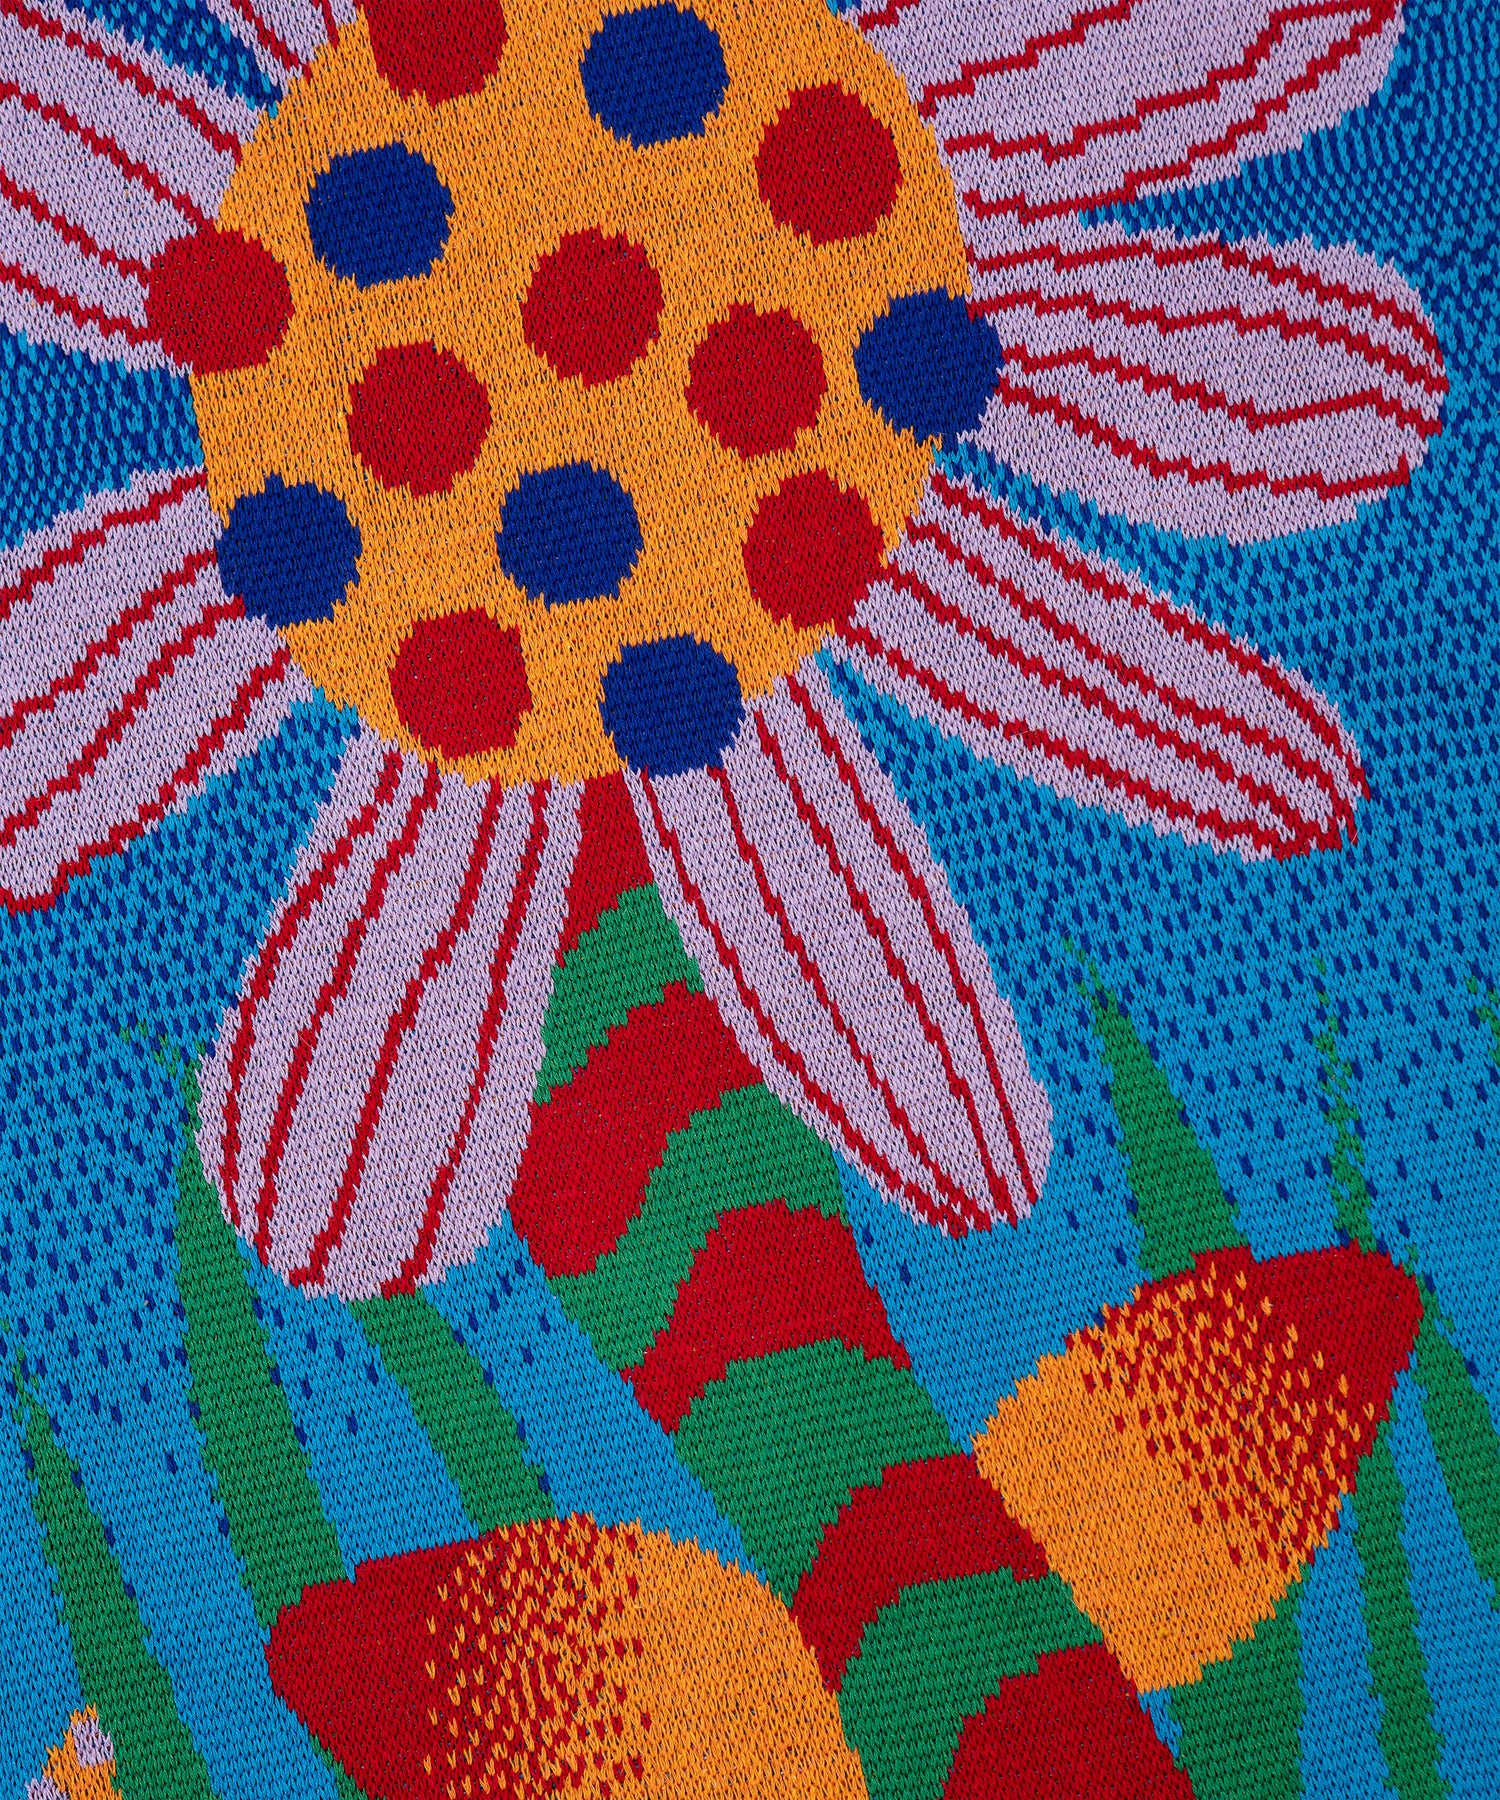 Close up image of Best Buds Blanket showing a light purple flower with blue and red dots on top of the yellow flower center. The flower is sitting on a red and green striped stem with two red and yellow gradient leaves.